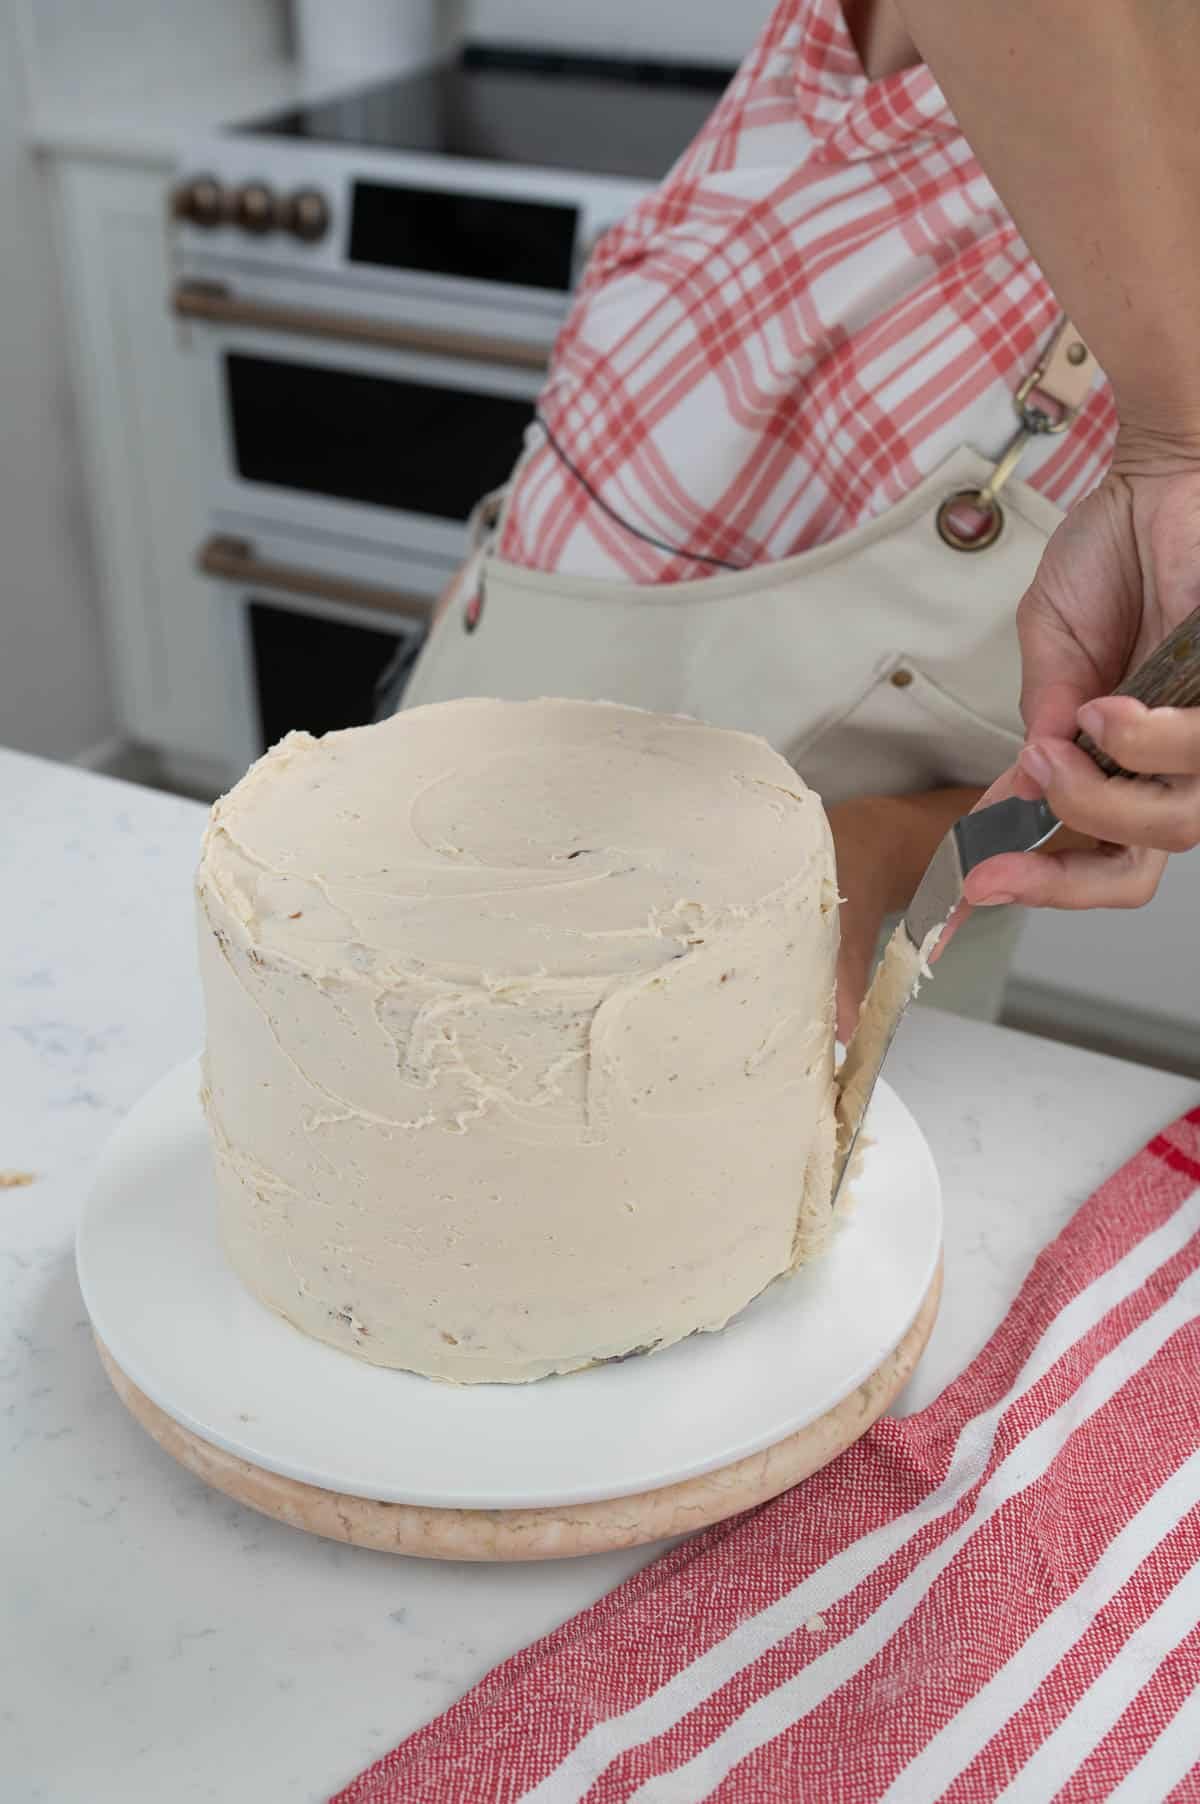 spreading a crumb coat of frosting on a cake